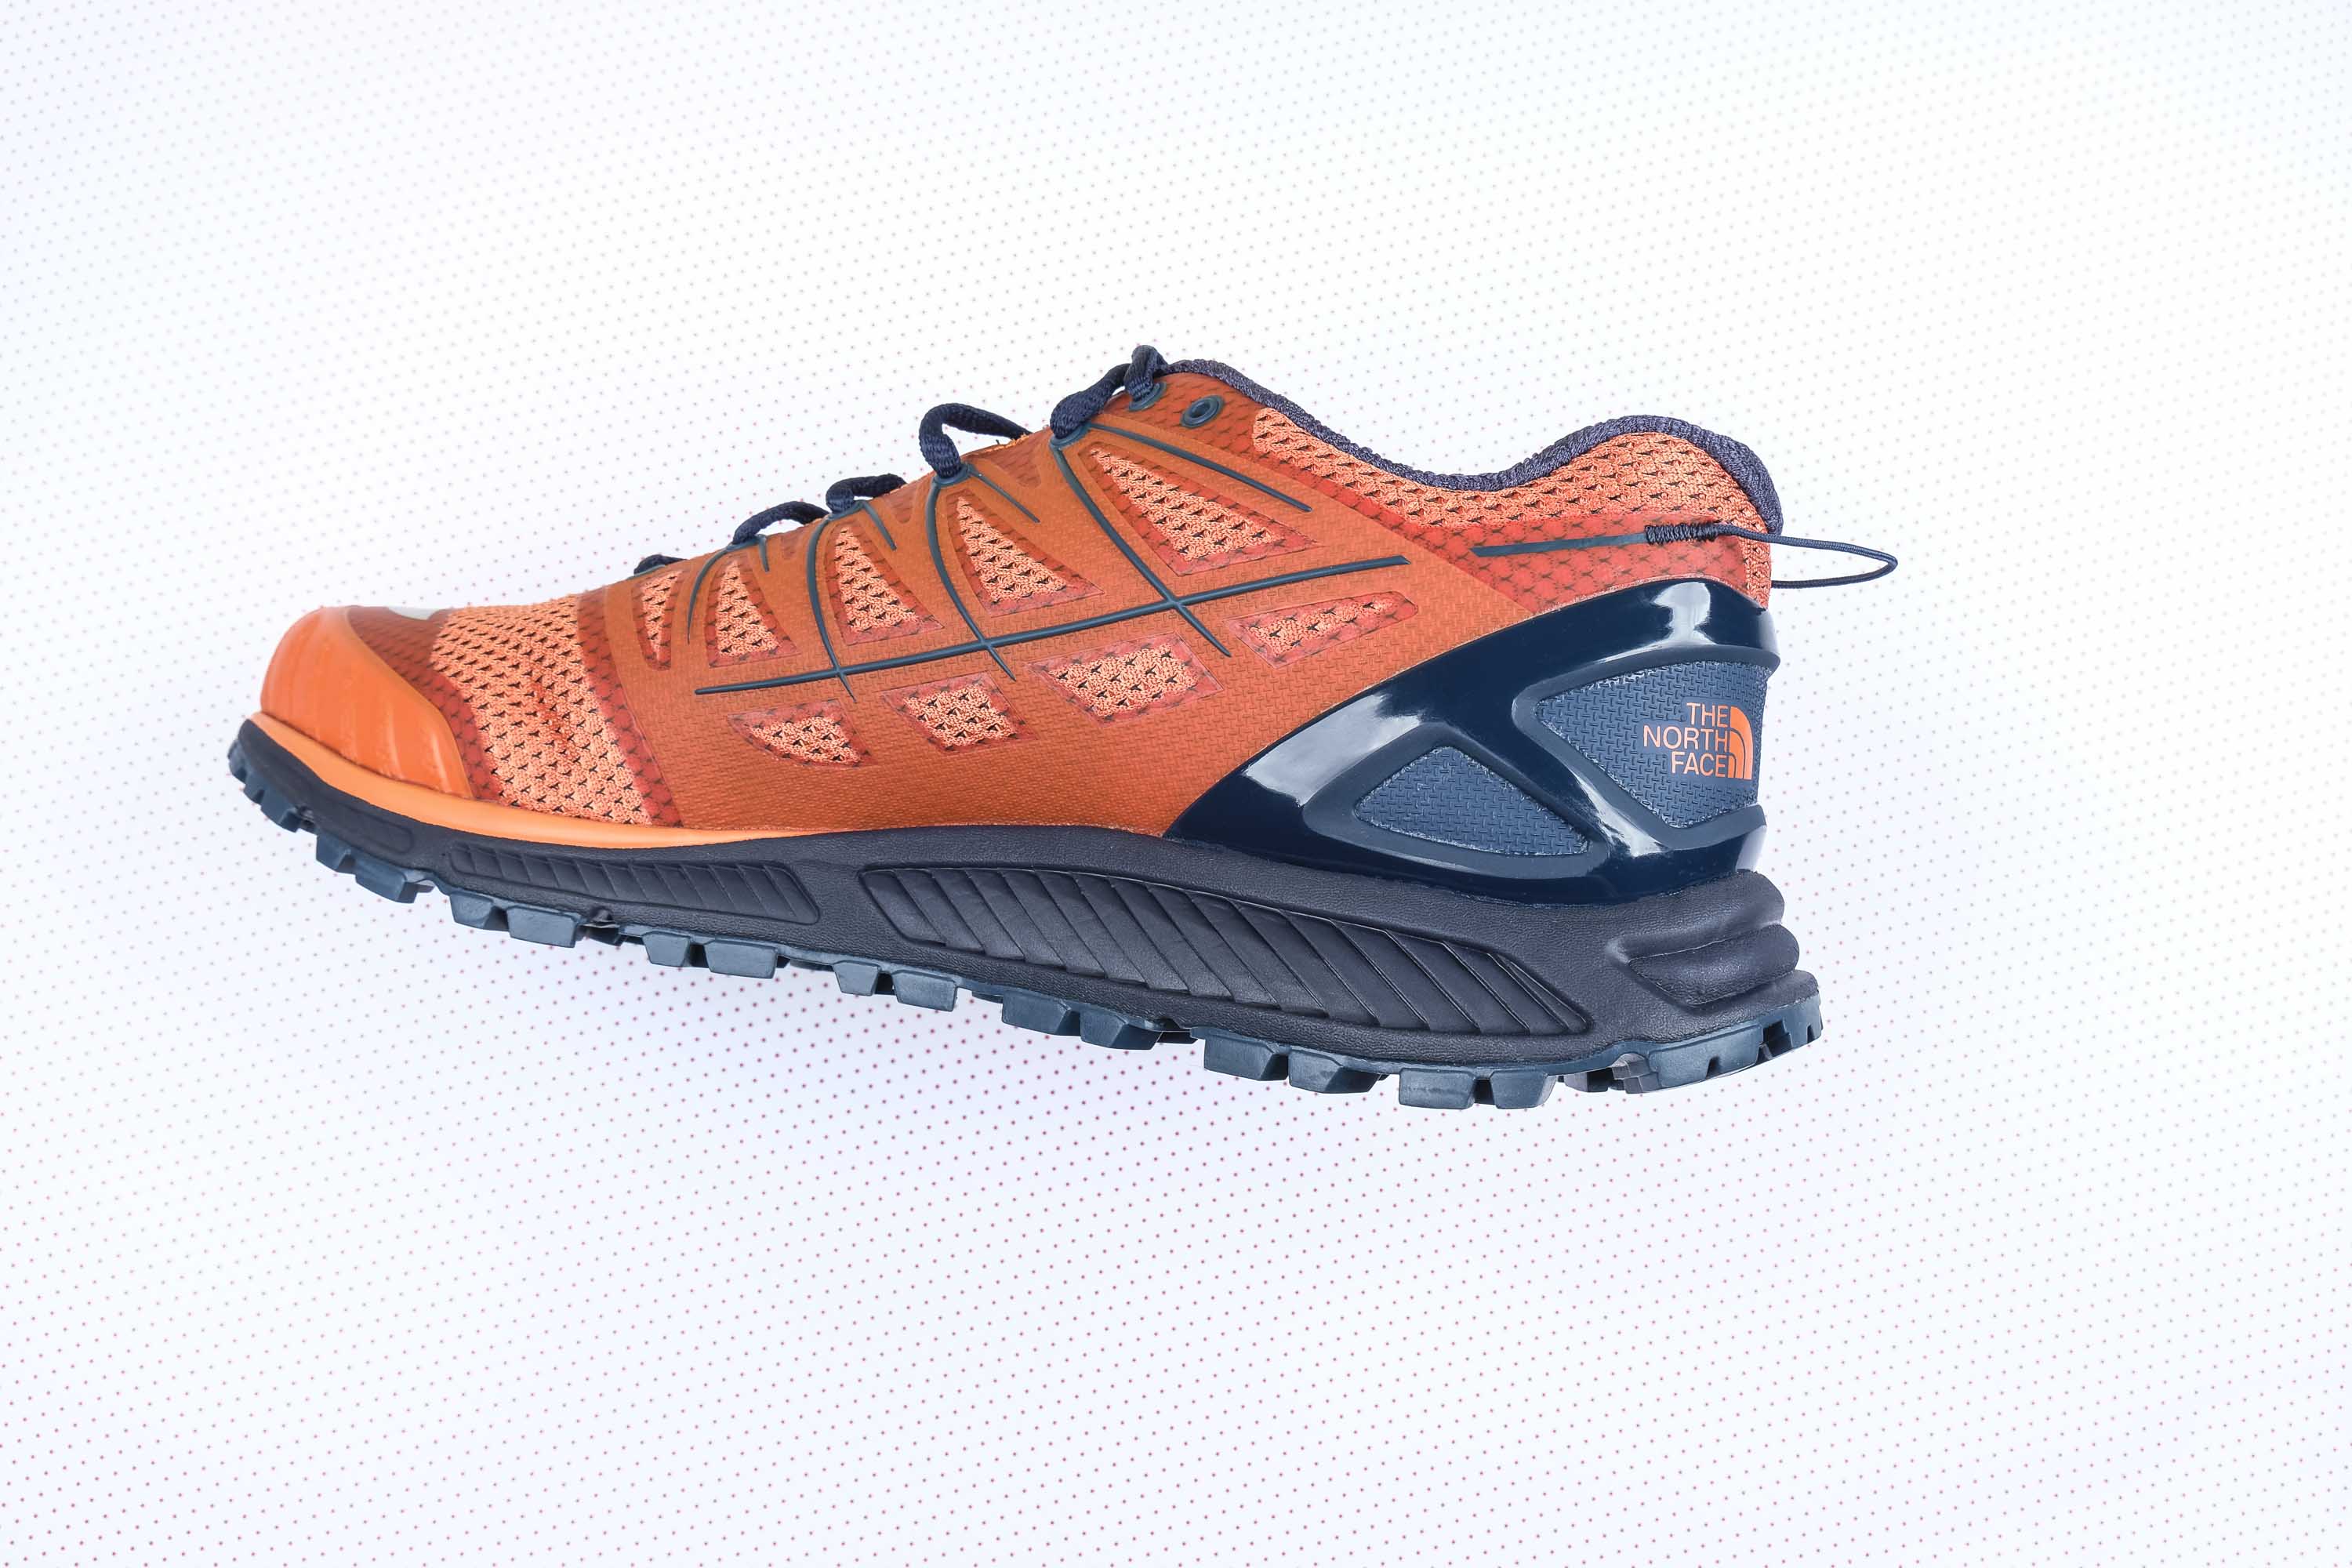 Product photography services studio photographer Singapore e-commerce shoot sport shoes the north face